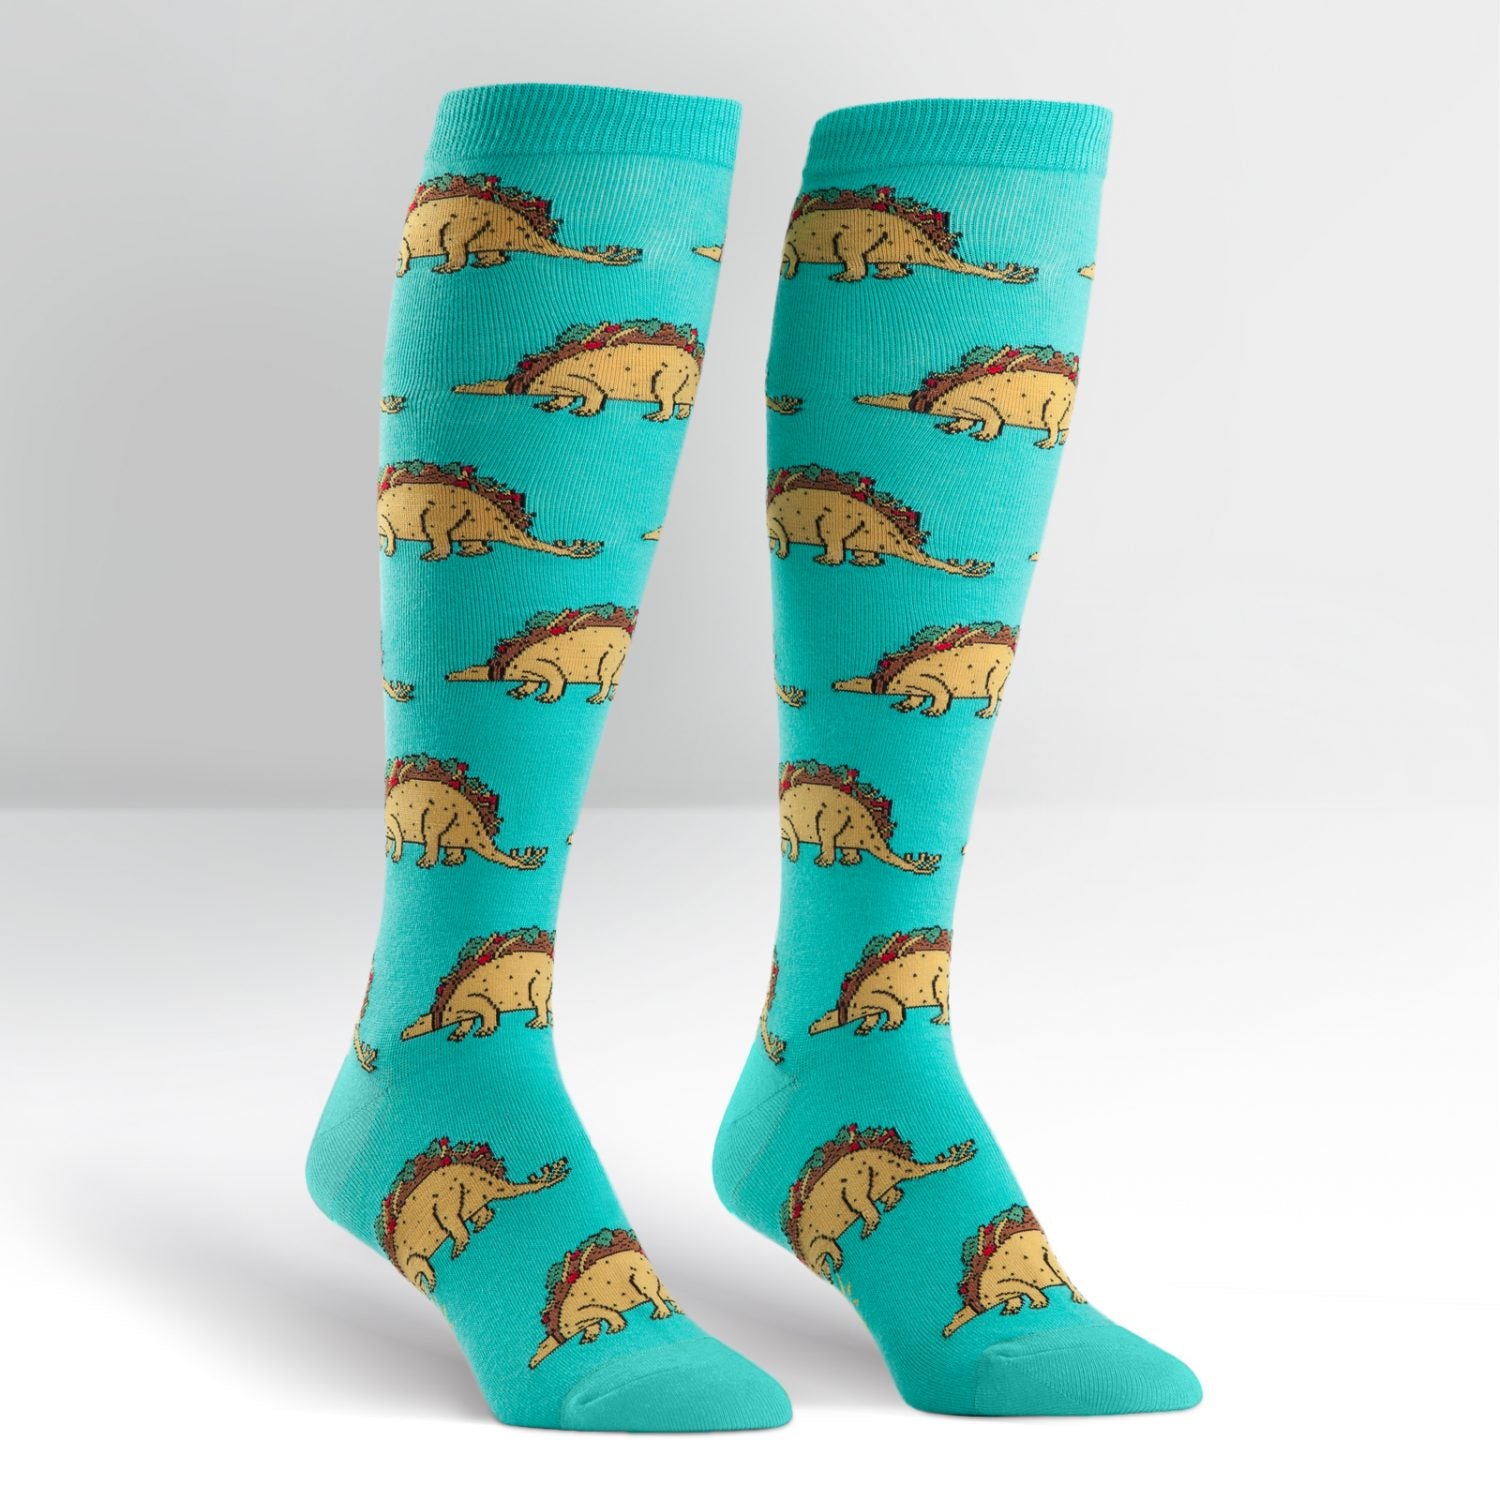 Tacosaurus Women's Knee High Socks in Extra Stretchy for Wide Calves